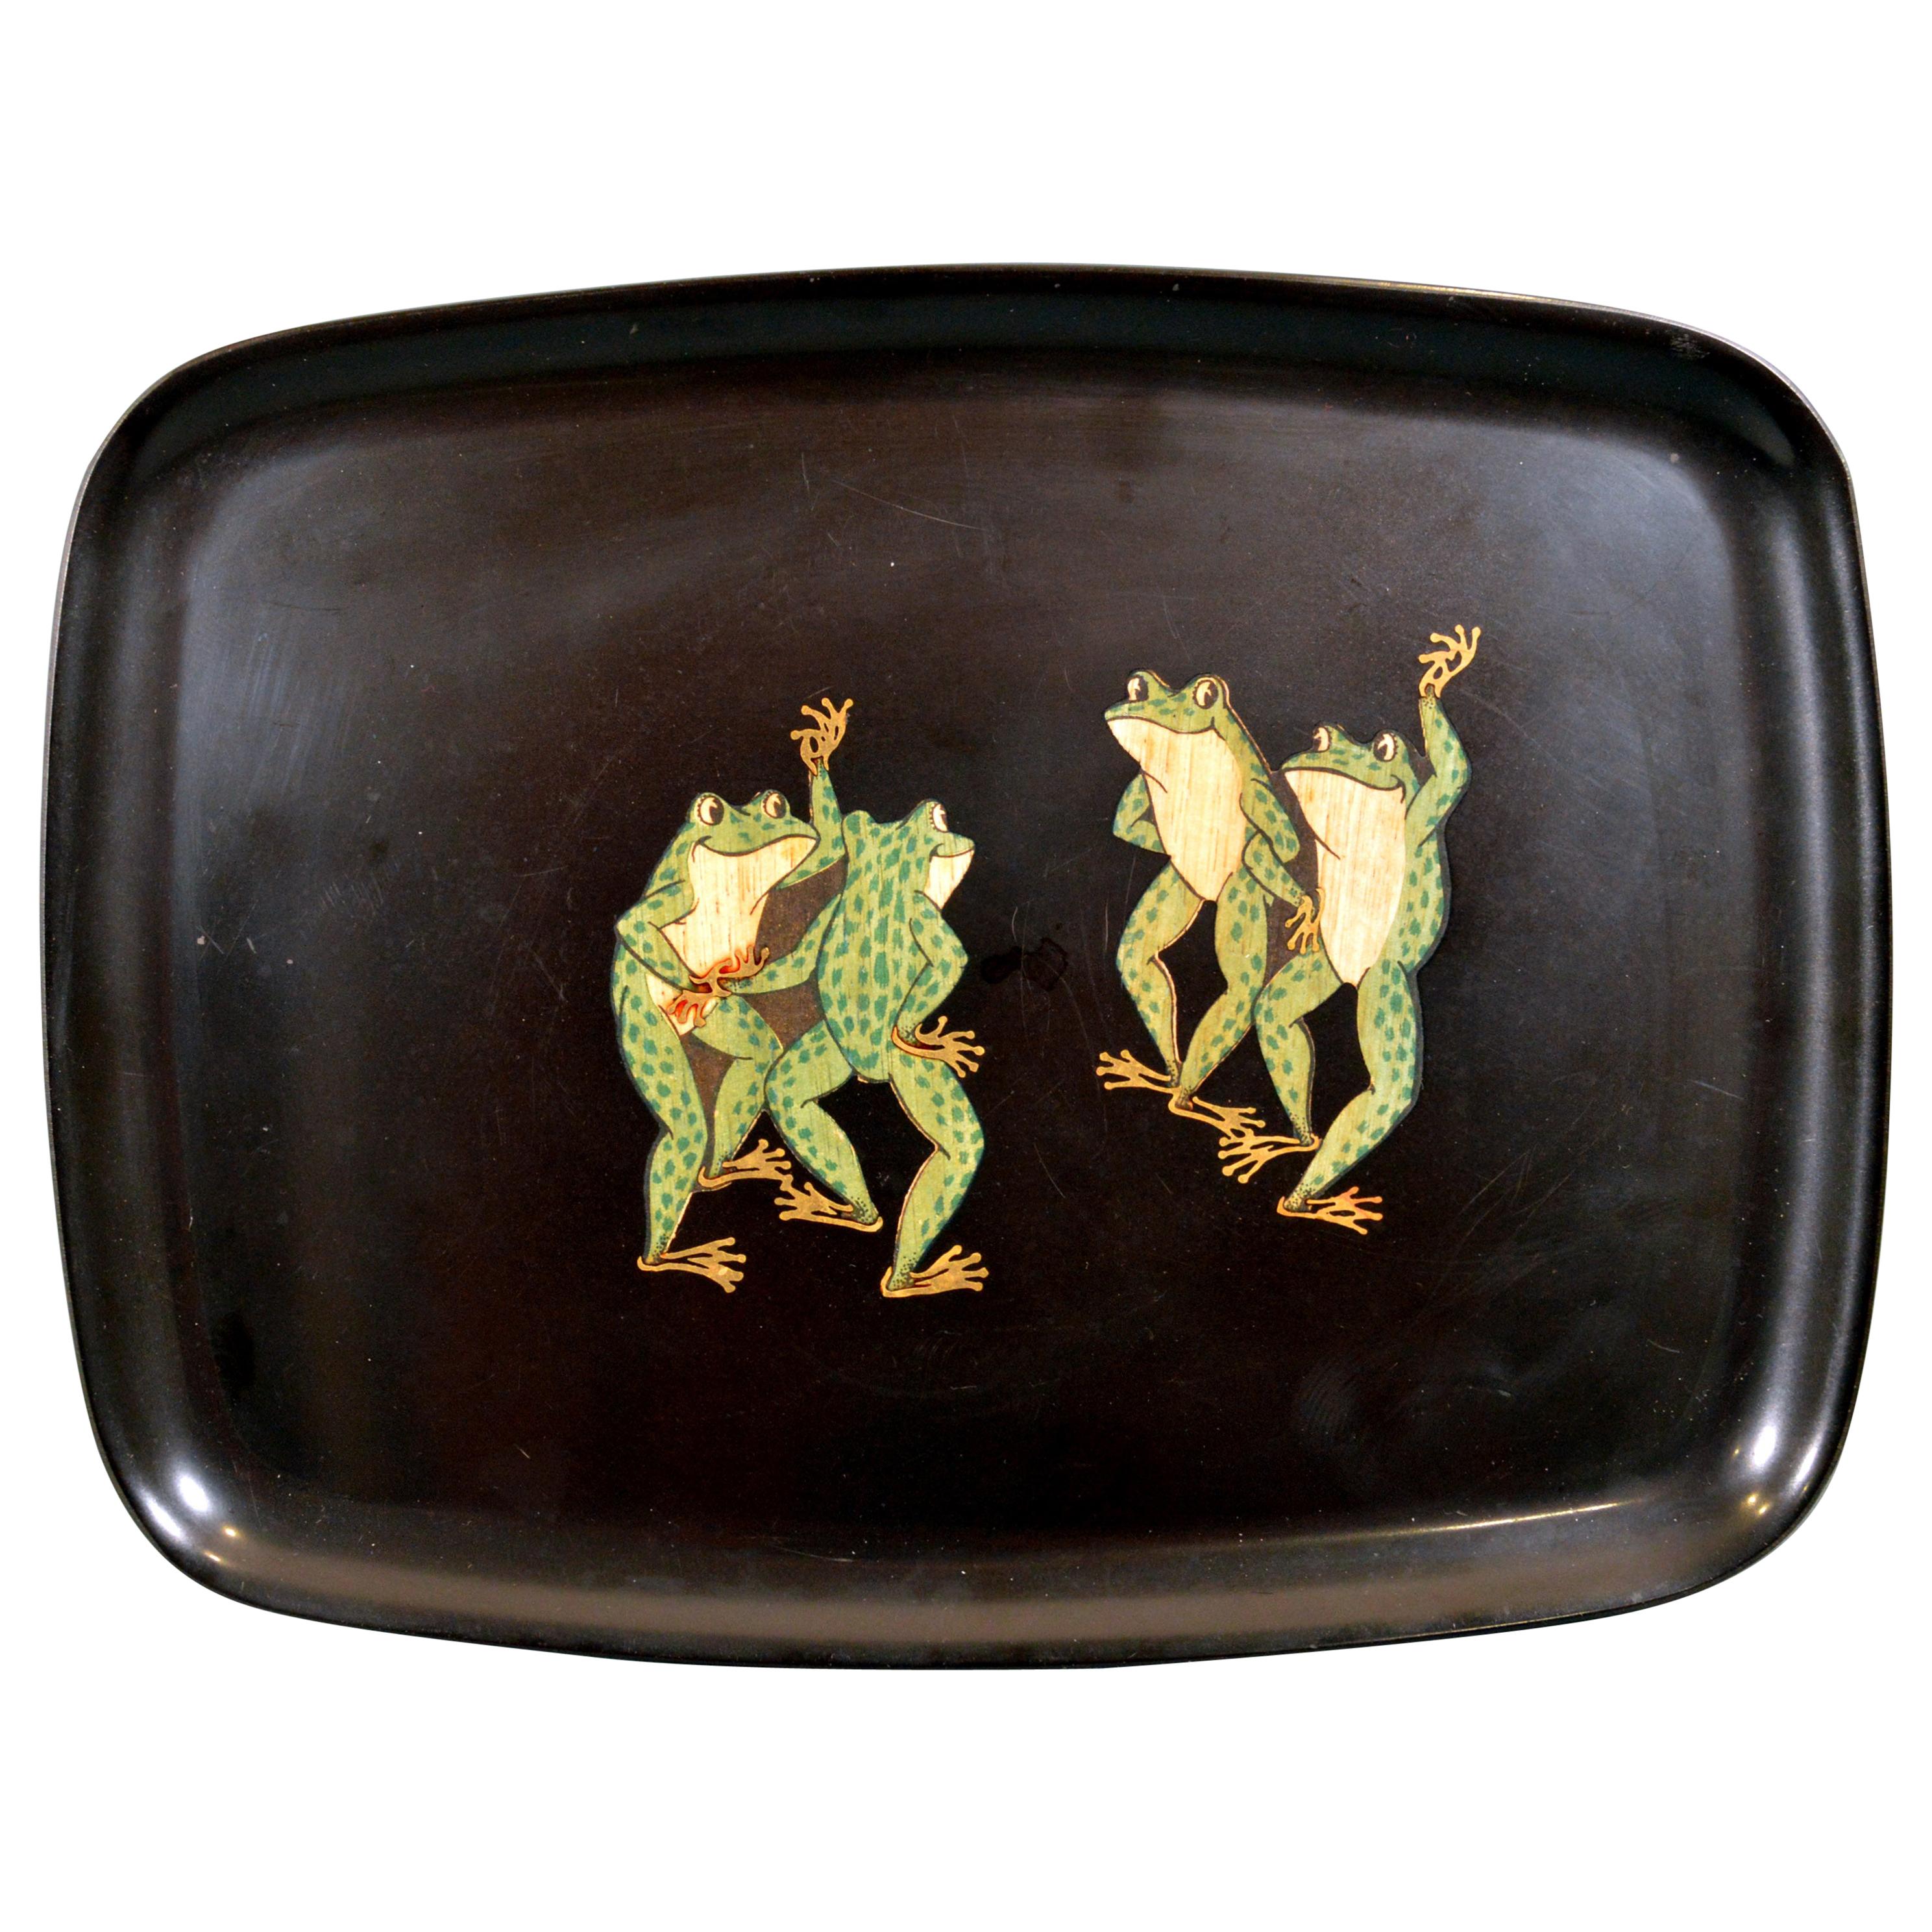 Couroc Tray with Frogs, Monterey, California 1970s